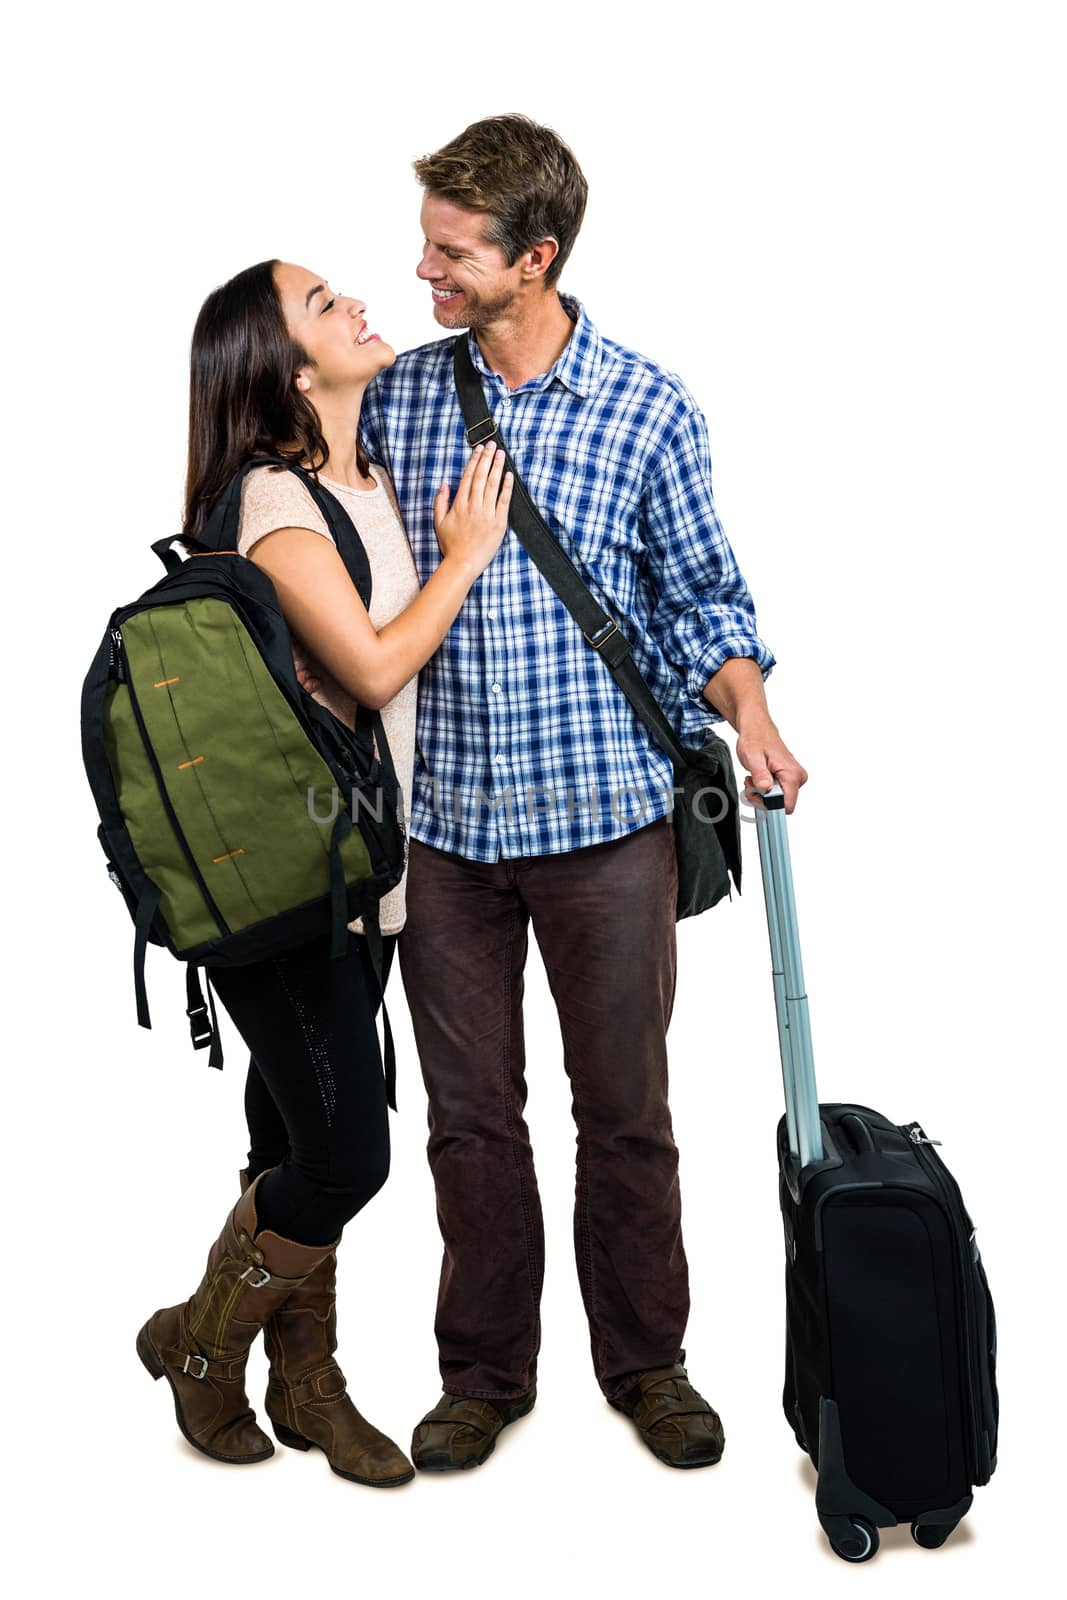 Full length of couple with bags embracing each other against white background